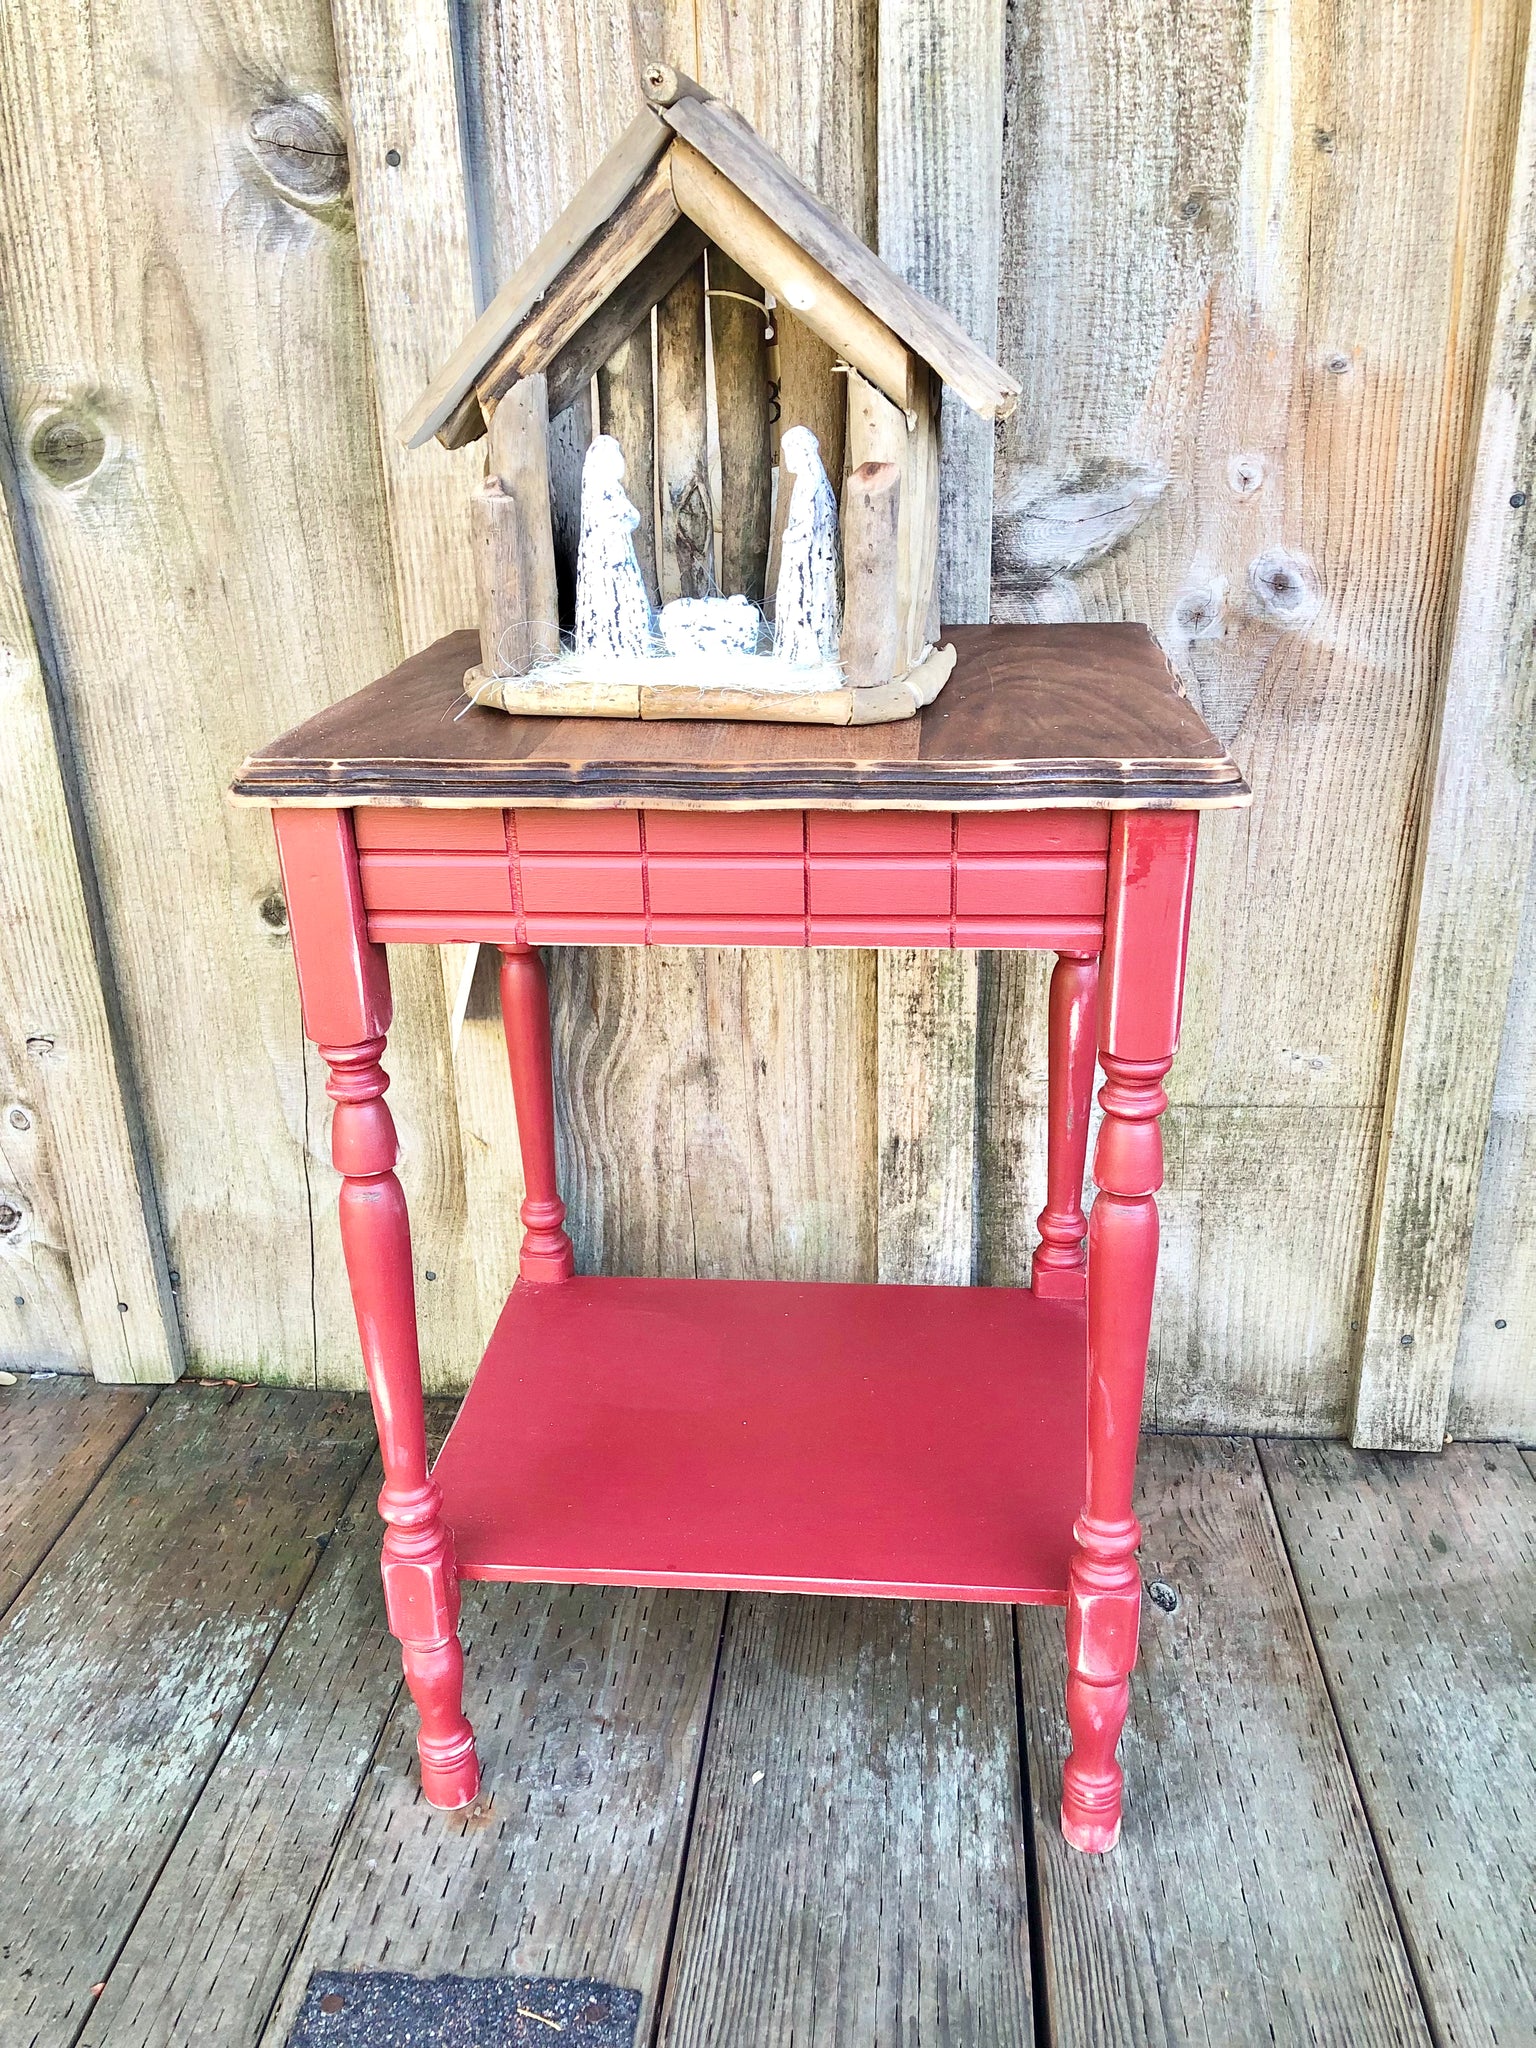 Little red table